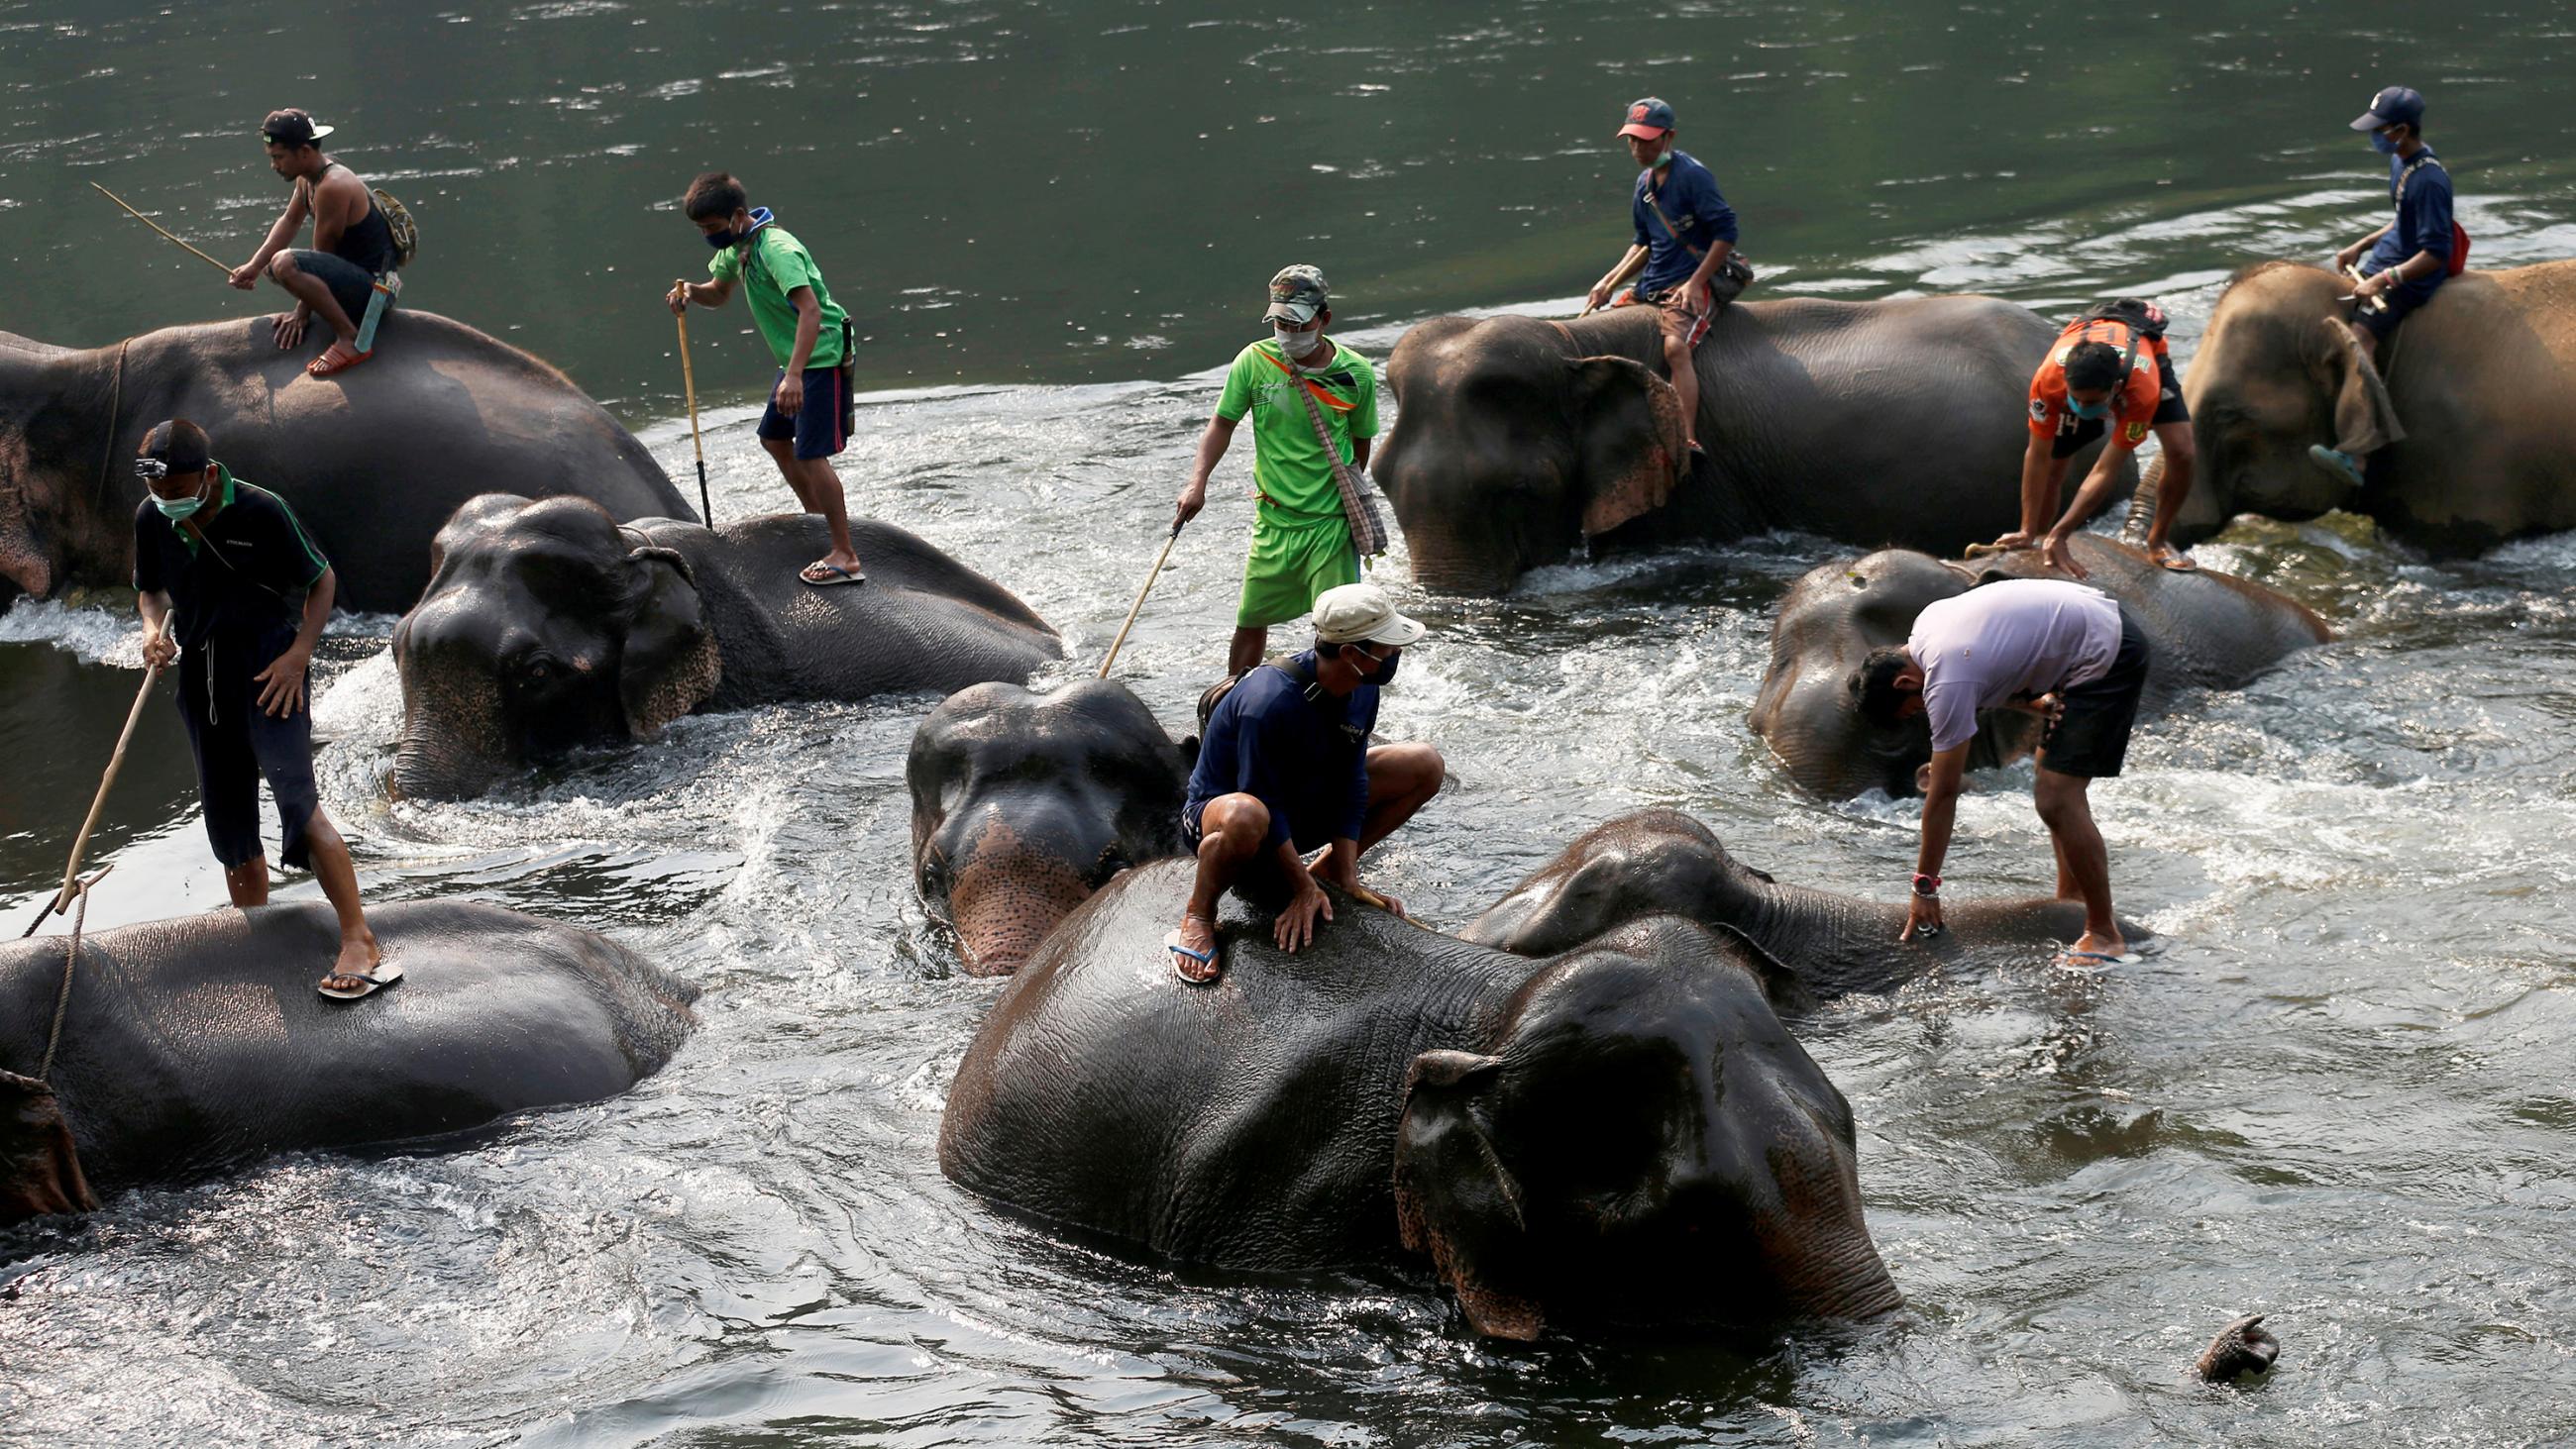 The picture shows a gathering of elephants in a body of water with people riding on their backs into the drink. Picture taken April 3, 2020. 